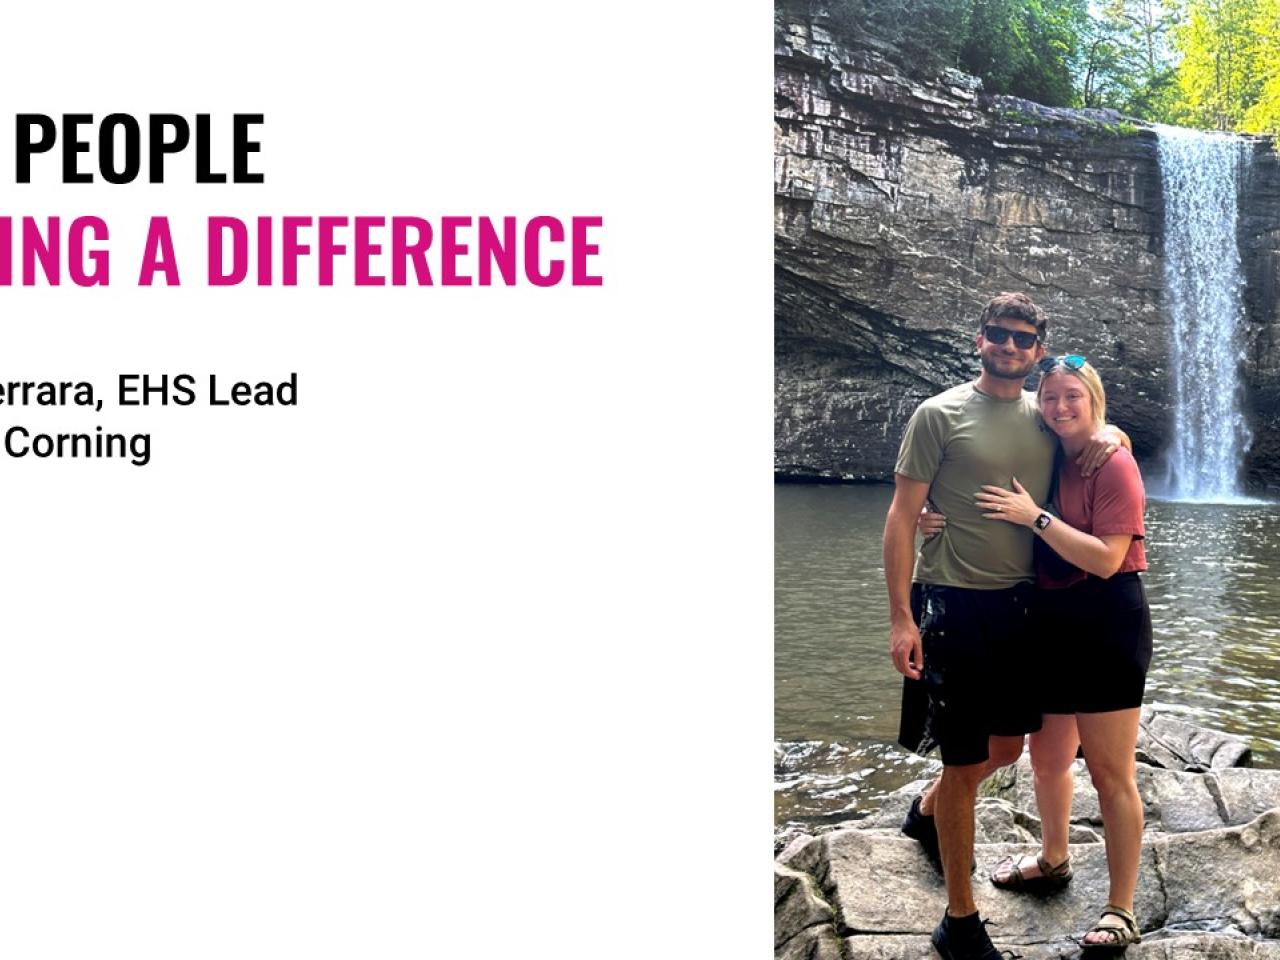 "Our People Making a Difference" with an image of two people near a waterfall